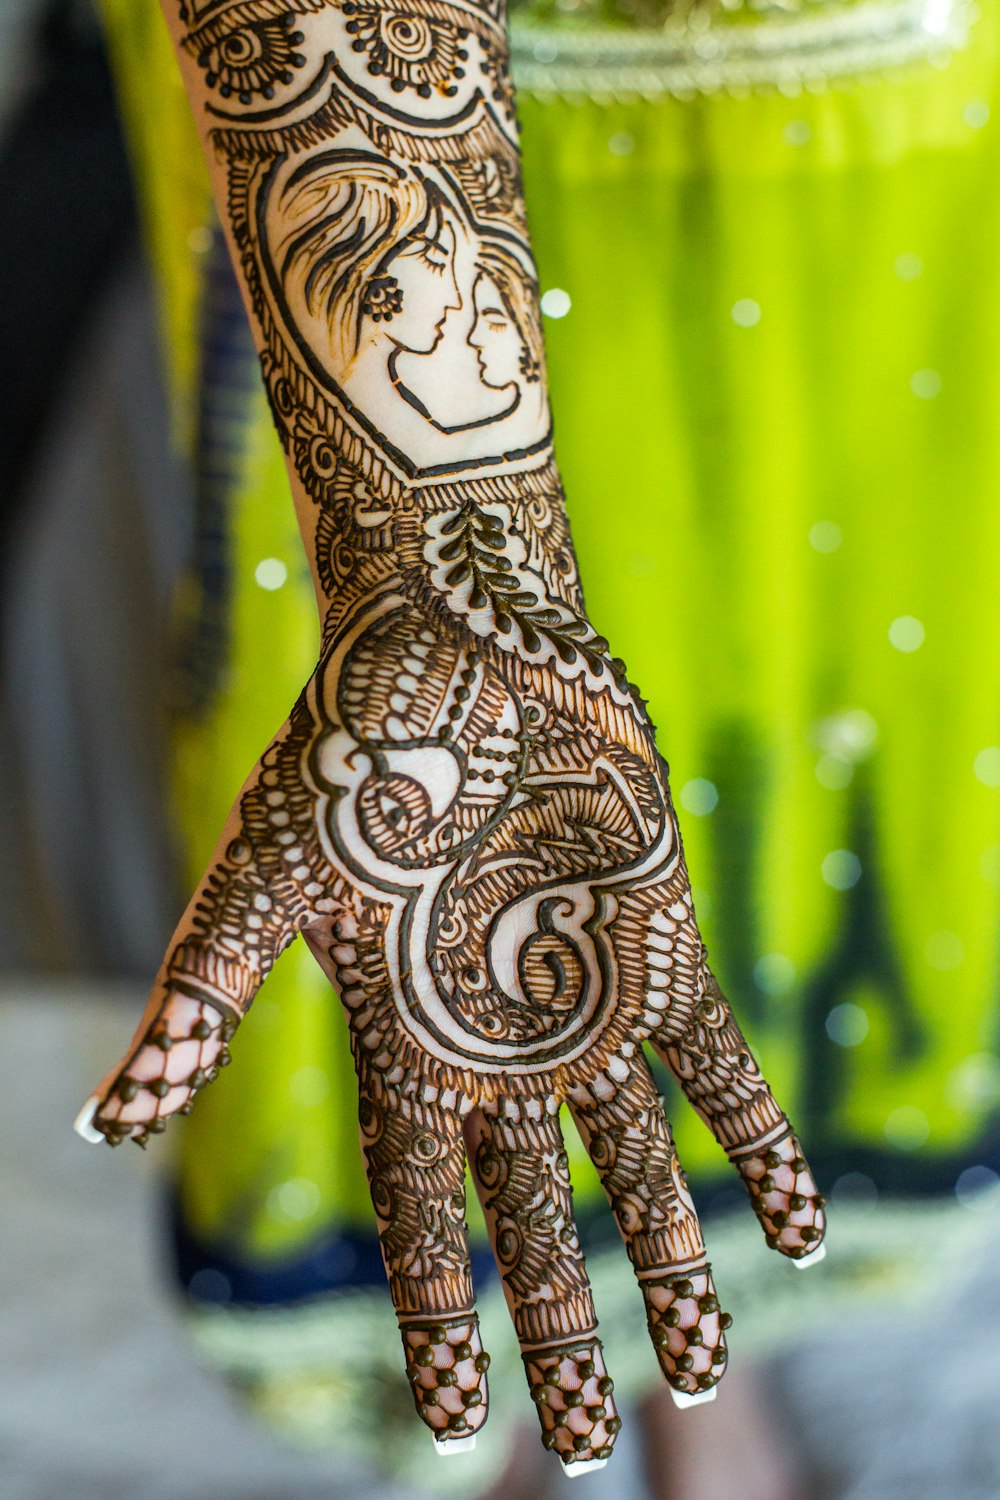 500+ Henna Pictures [HD] | Download Free Images on Unsplash